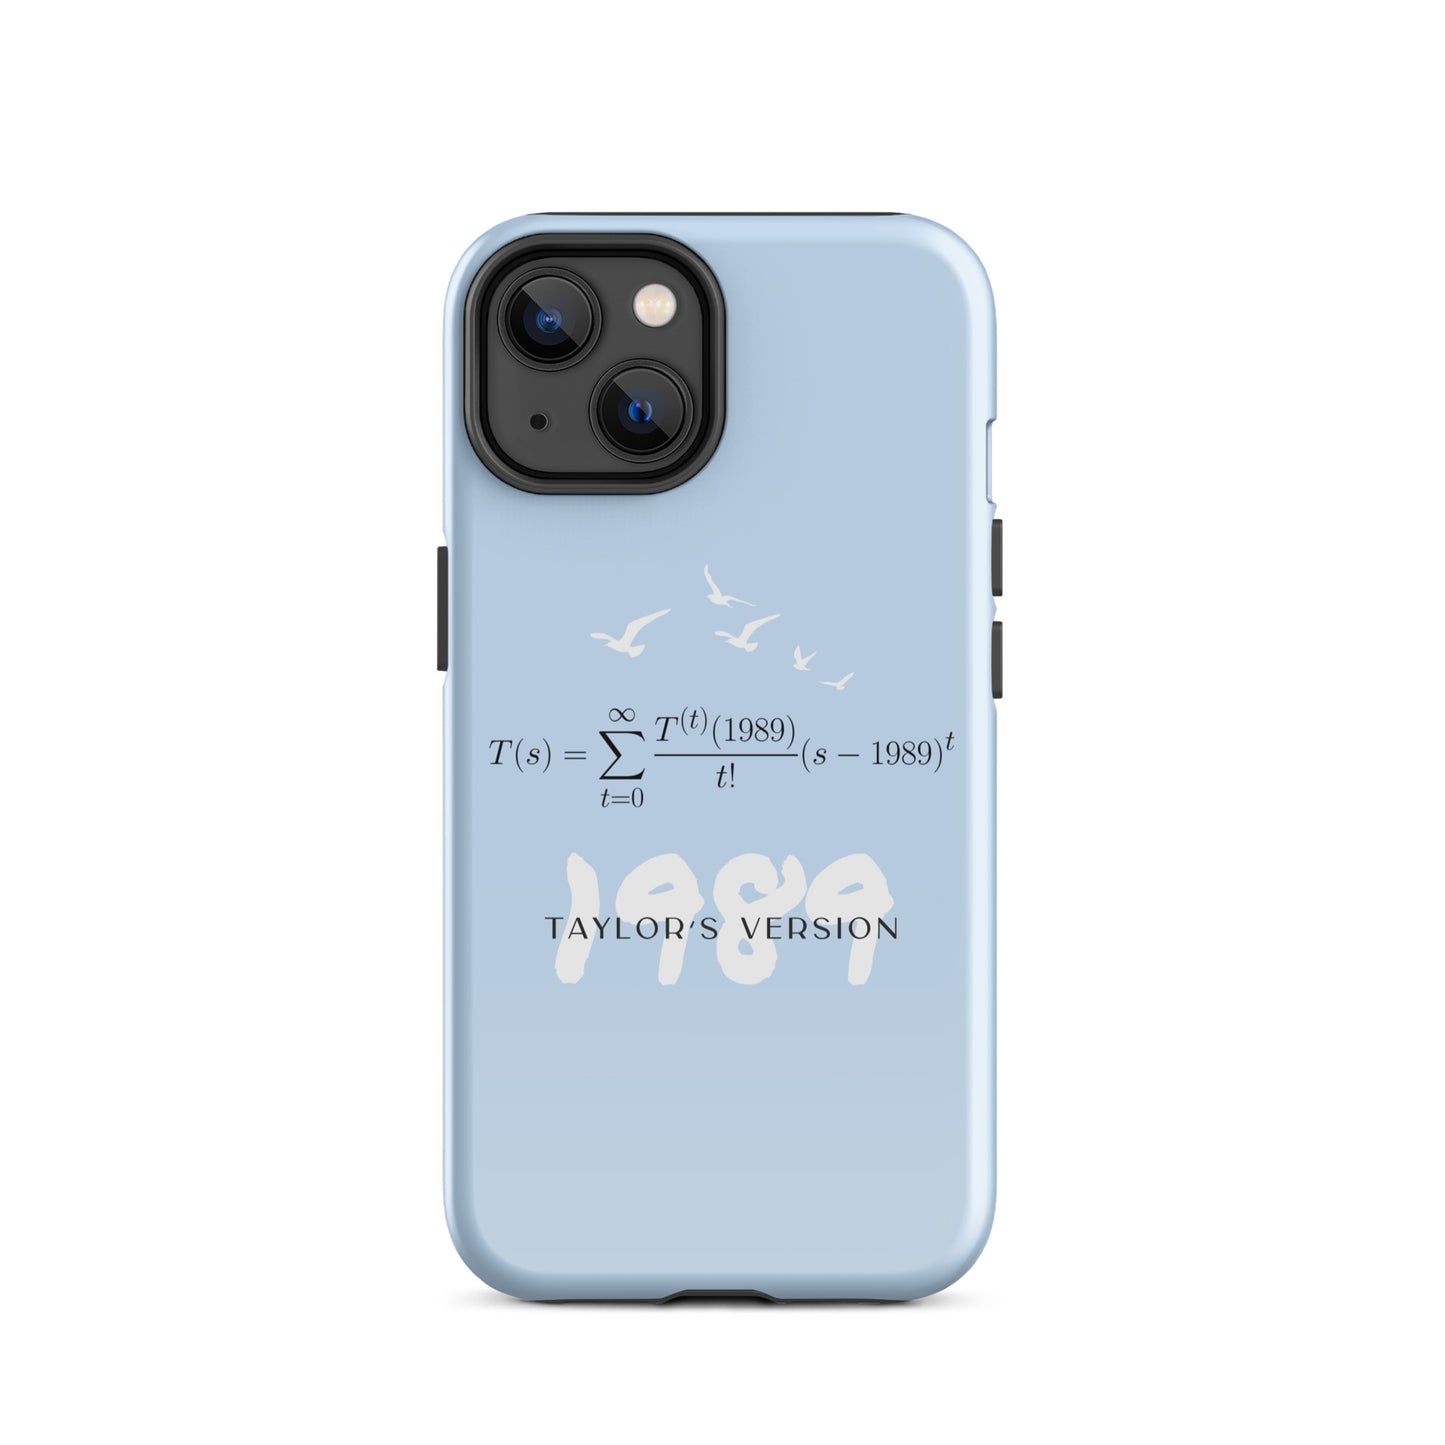 1989 (TV) Taylor Series iPhone Case